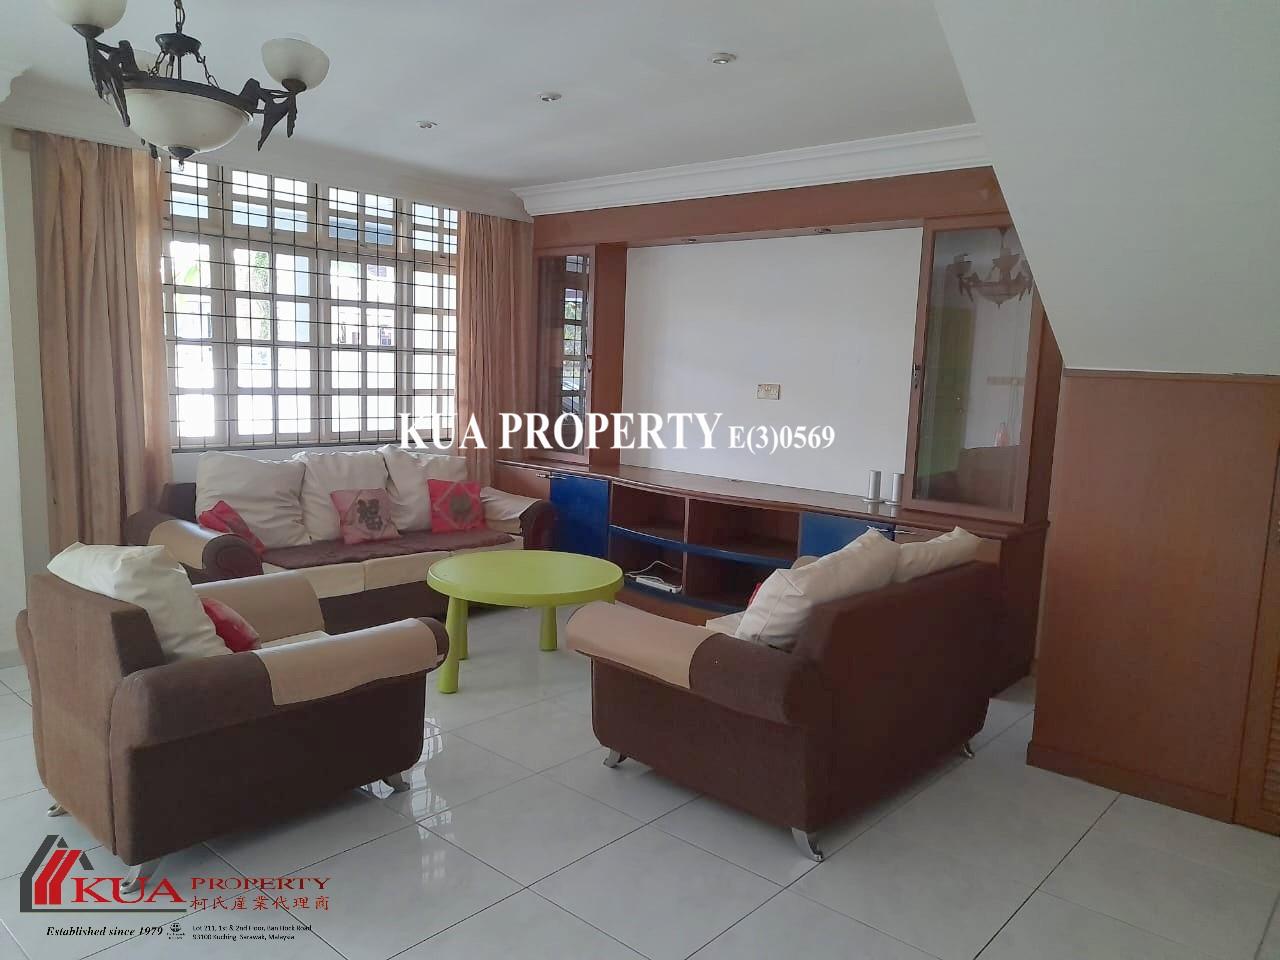 Double Storey Terrace House FOR RENT! Located at Hui Sing